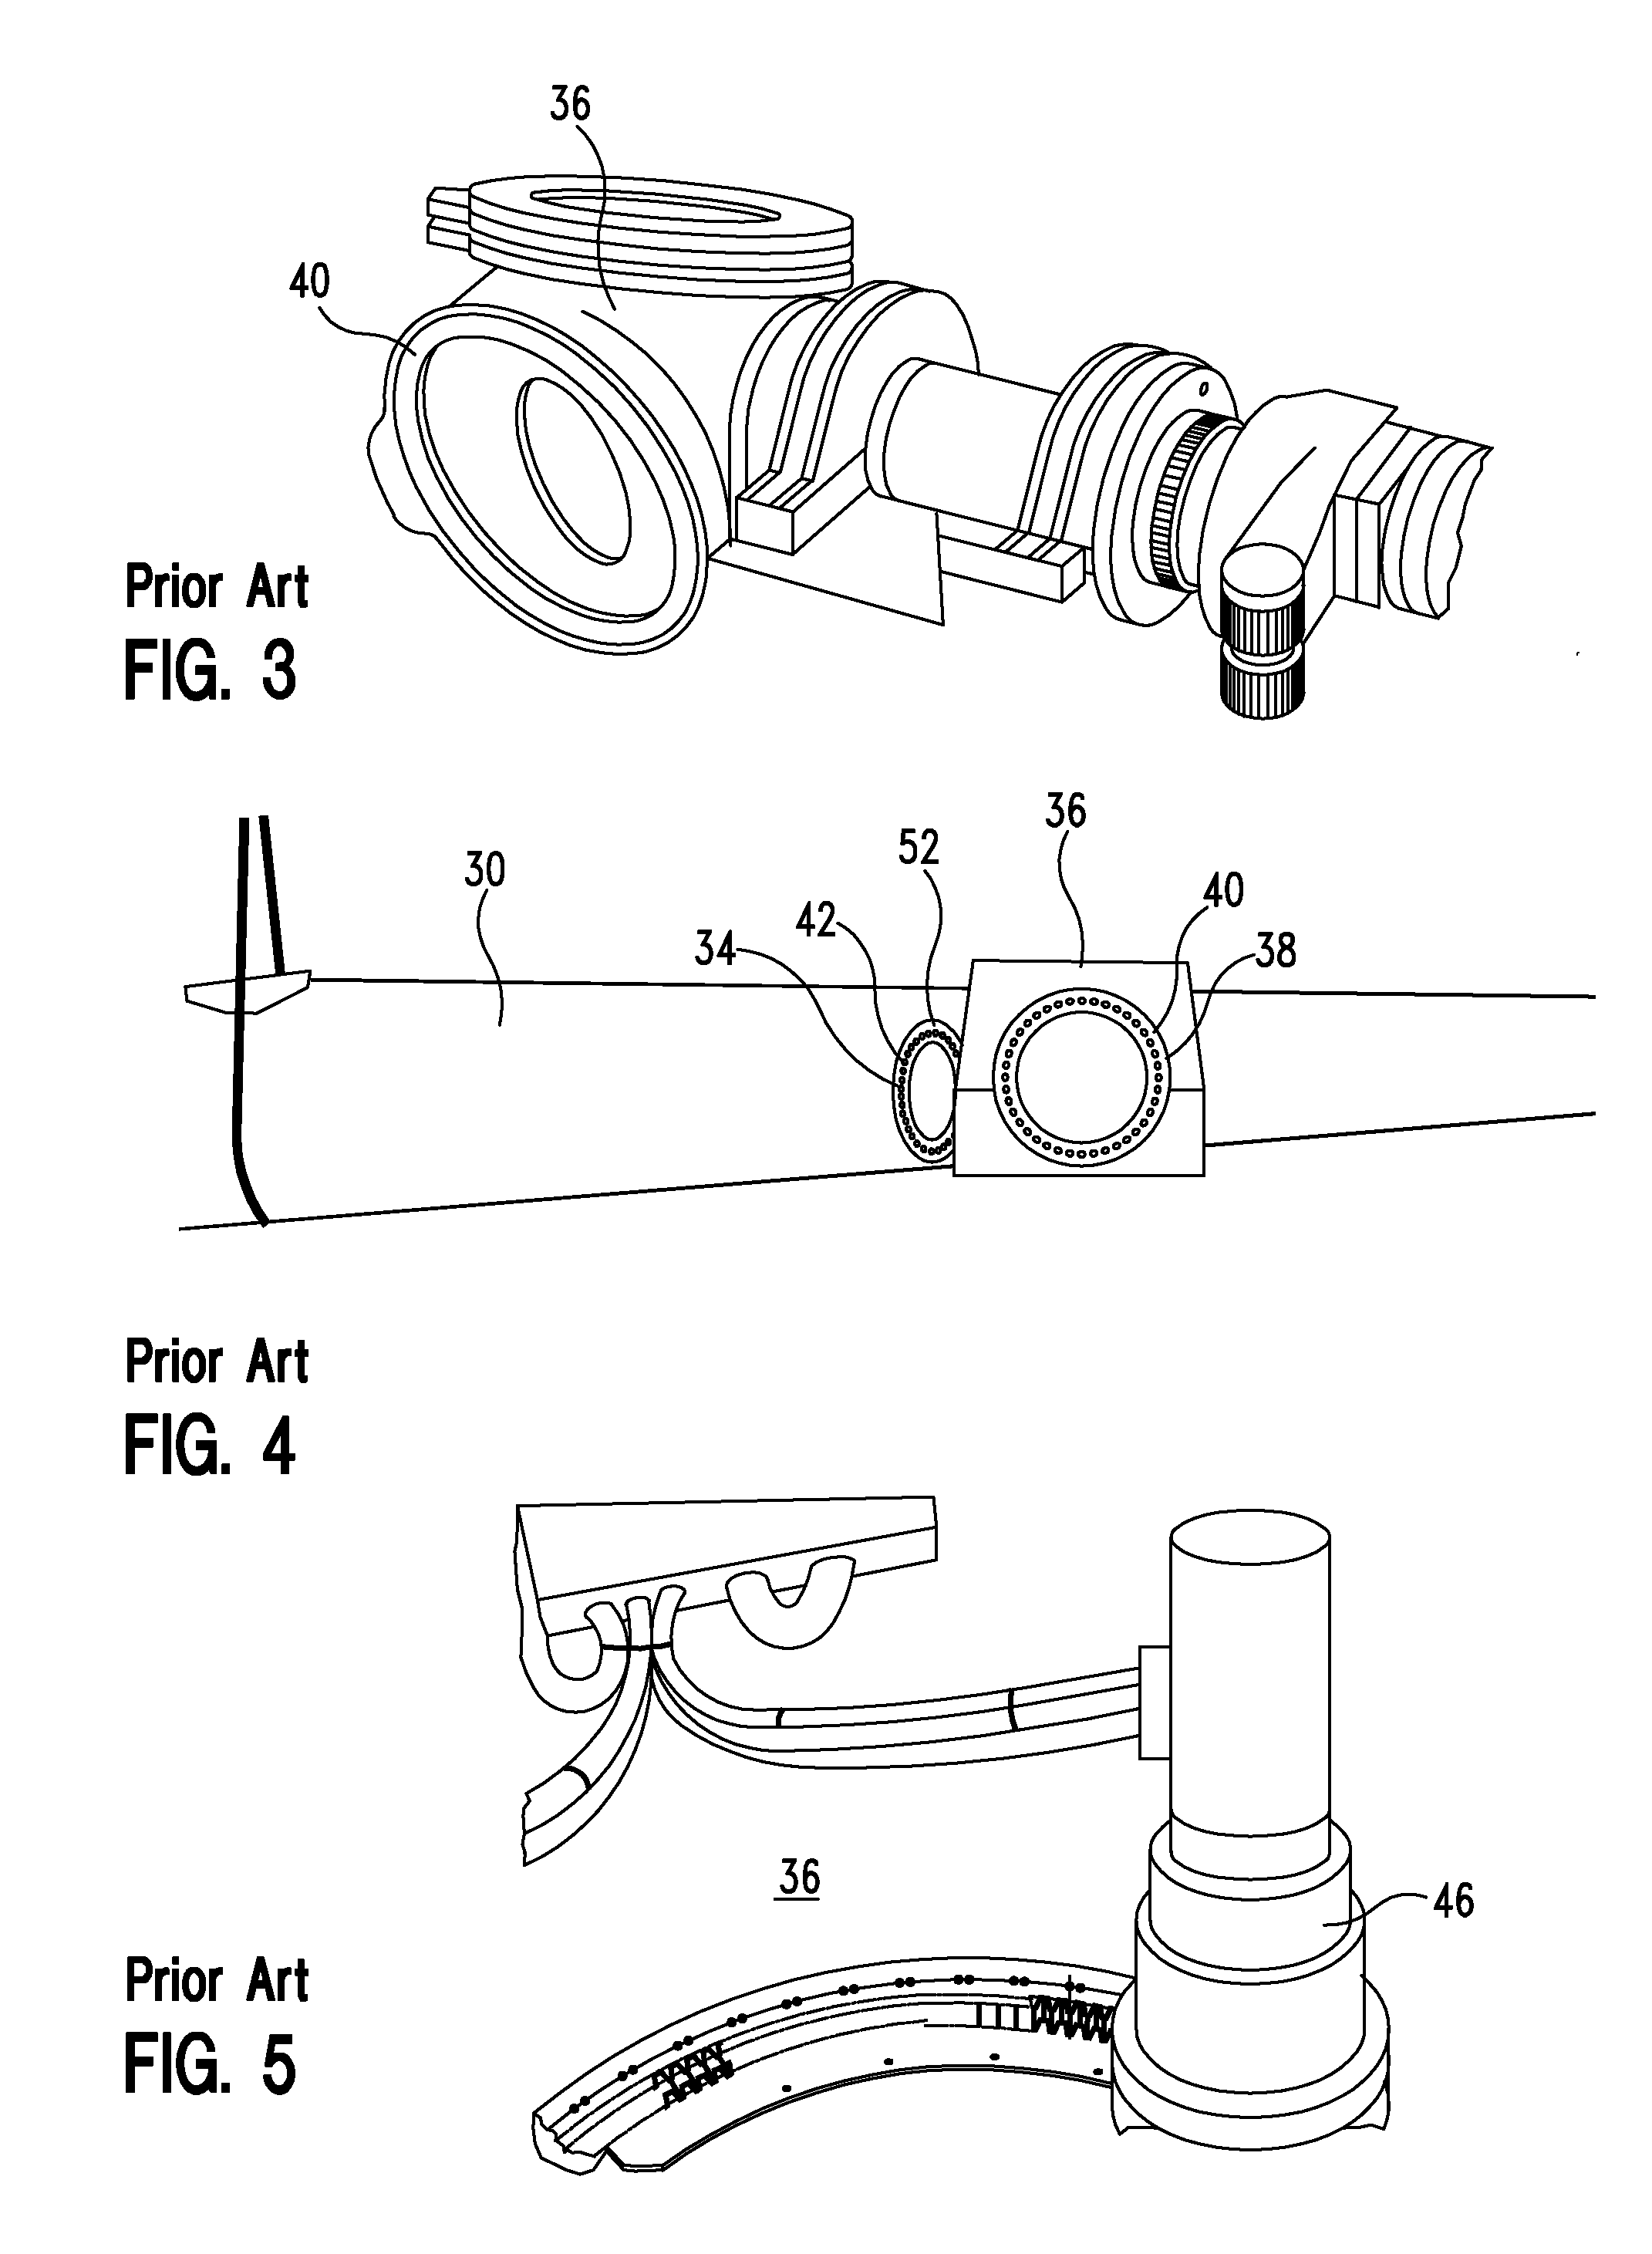 Wind Turbines and Other Rotating Structures with Instrumented Load-Sensor Bolts or Instrumented Load-Sensor Blades